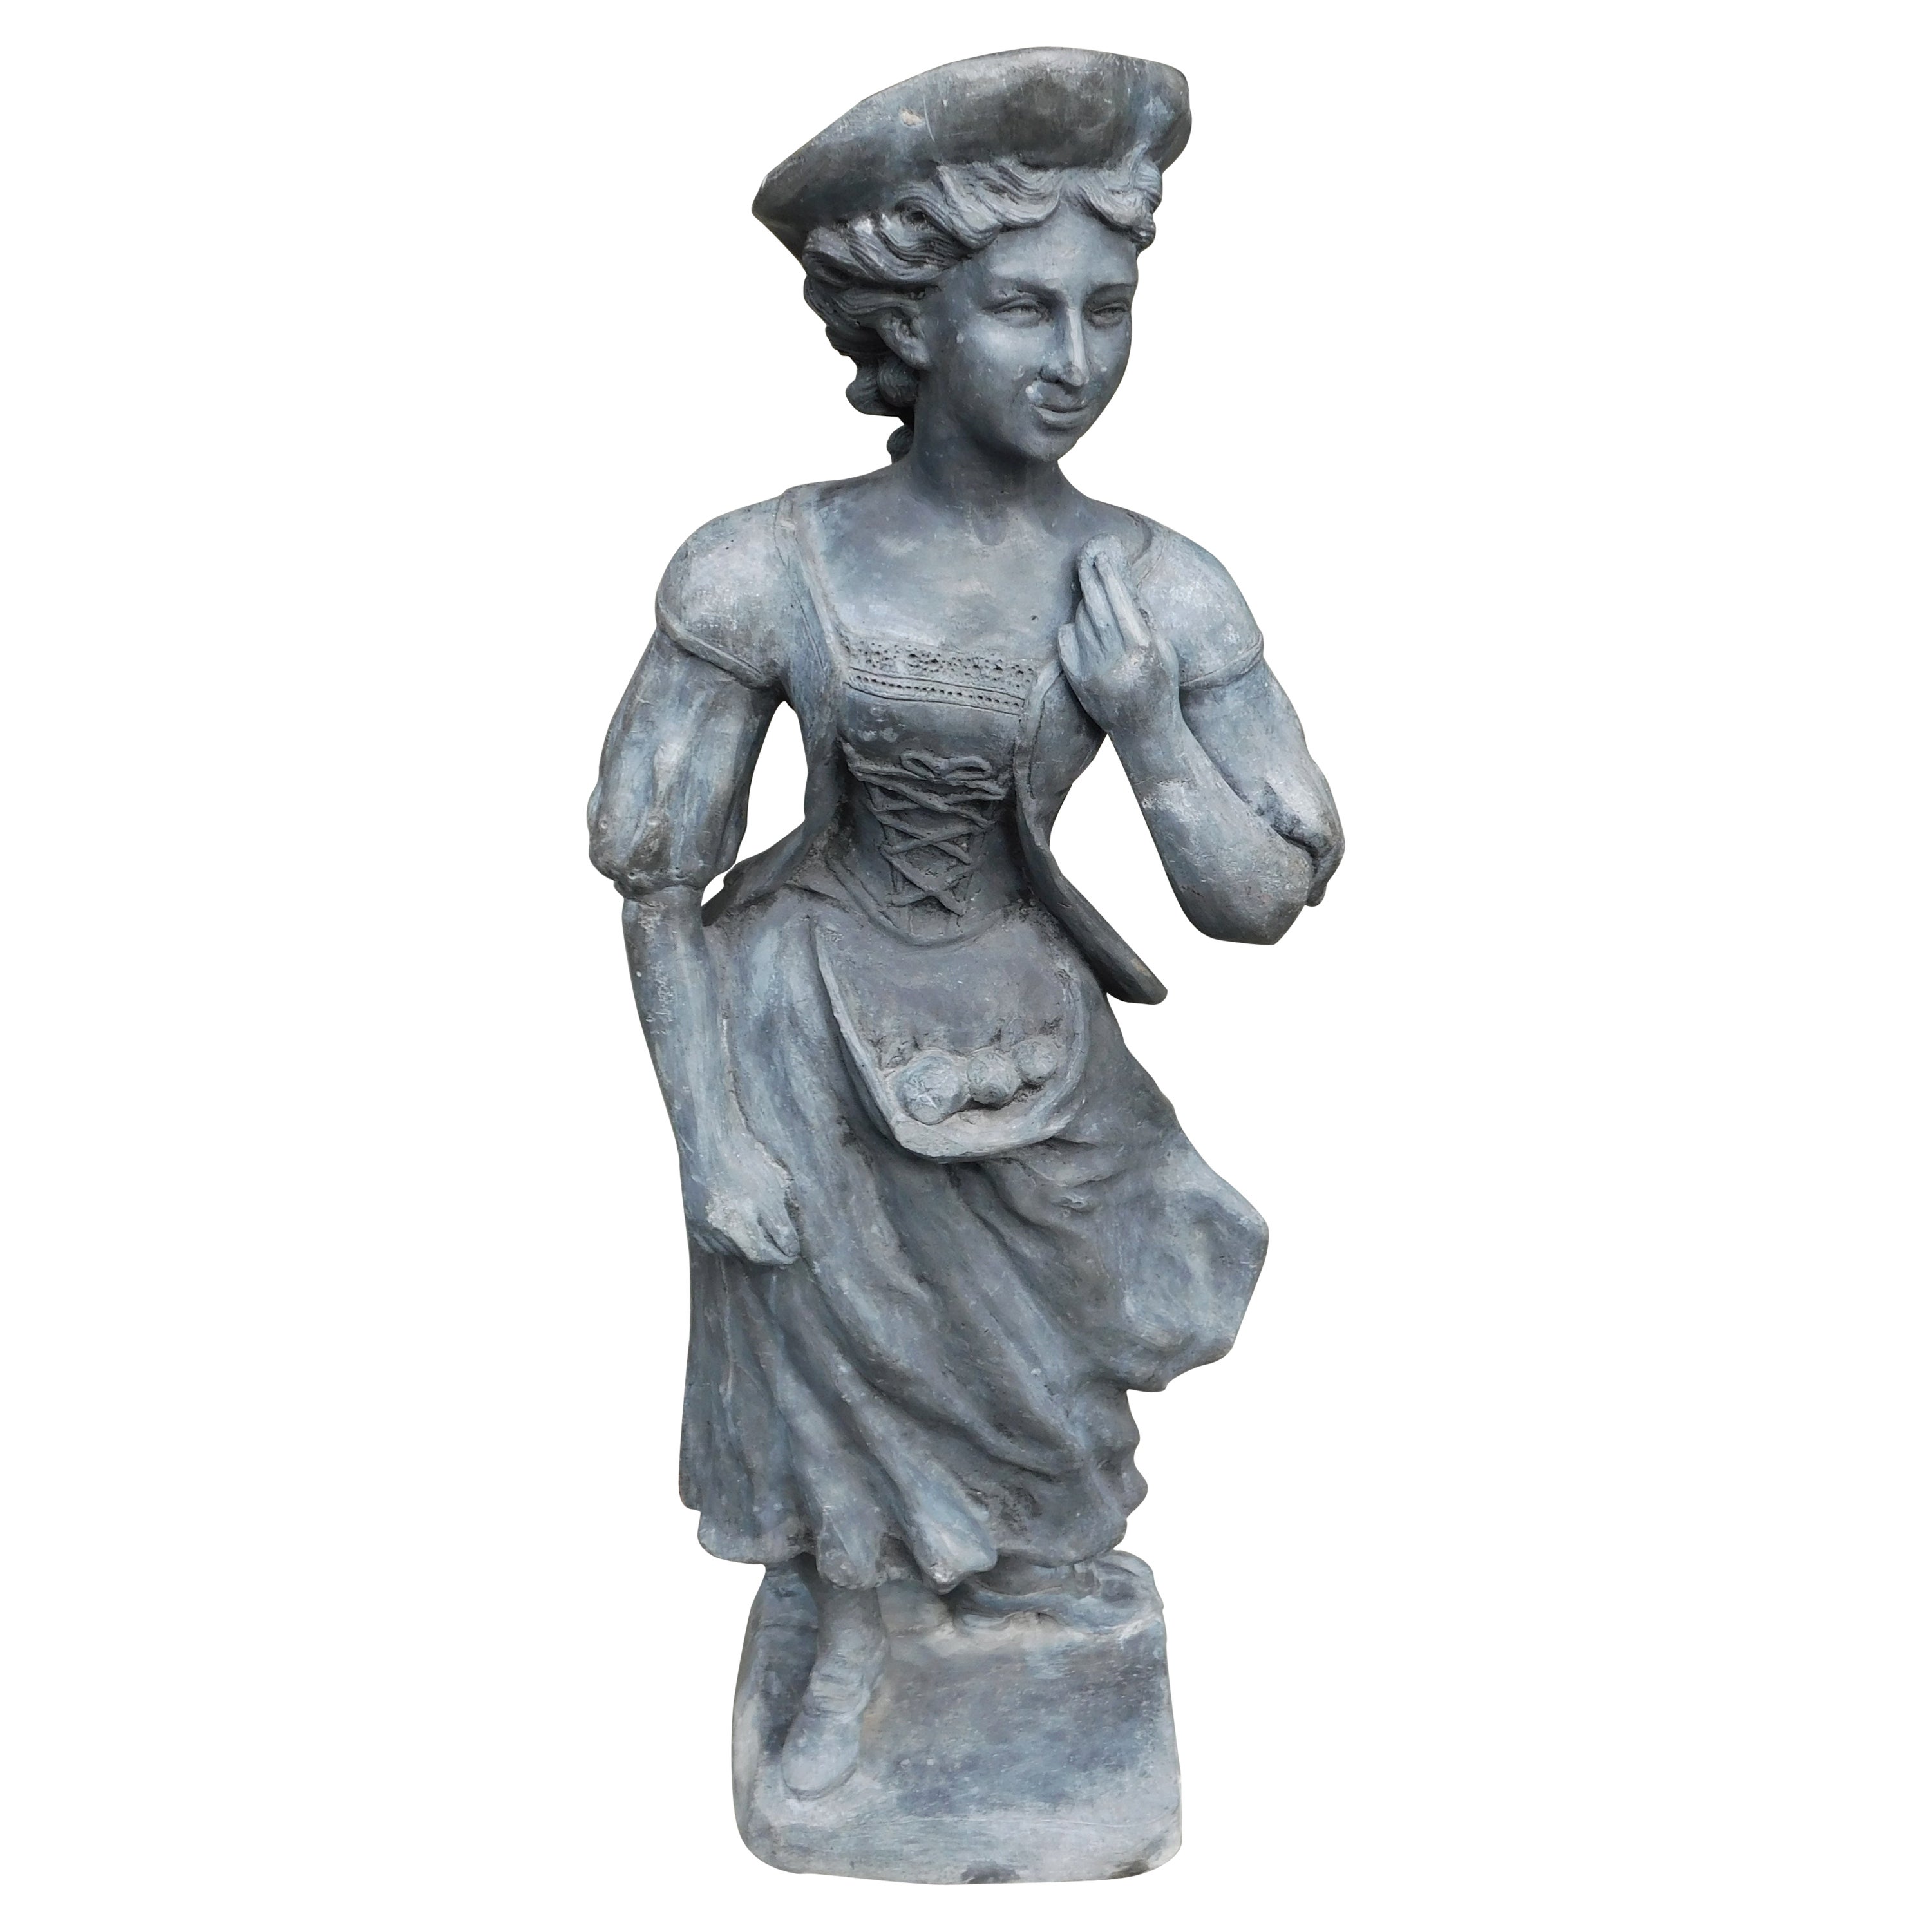 English Lead Figural Lady Garden Statue Standing on Squared Plinth, circa 1850